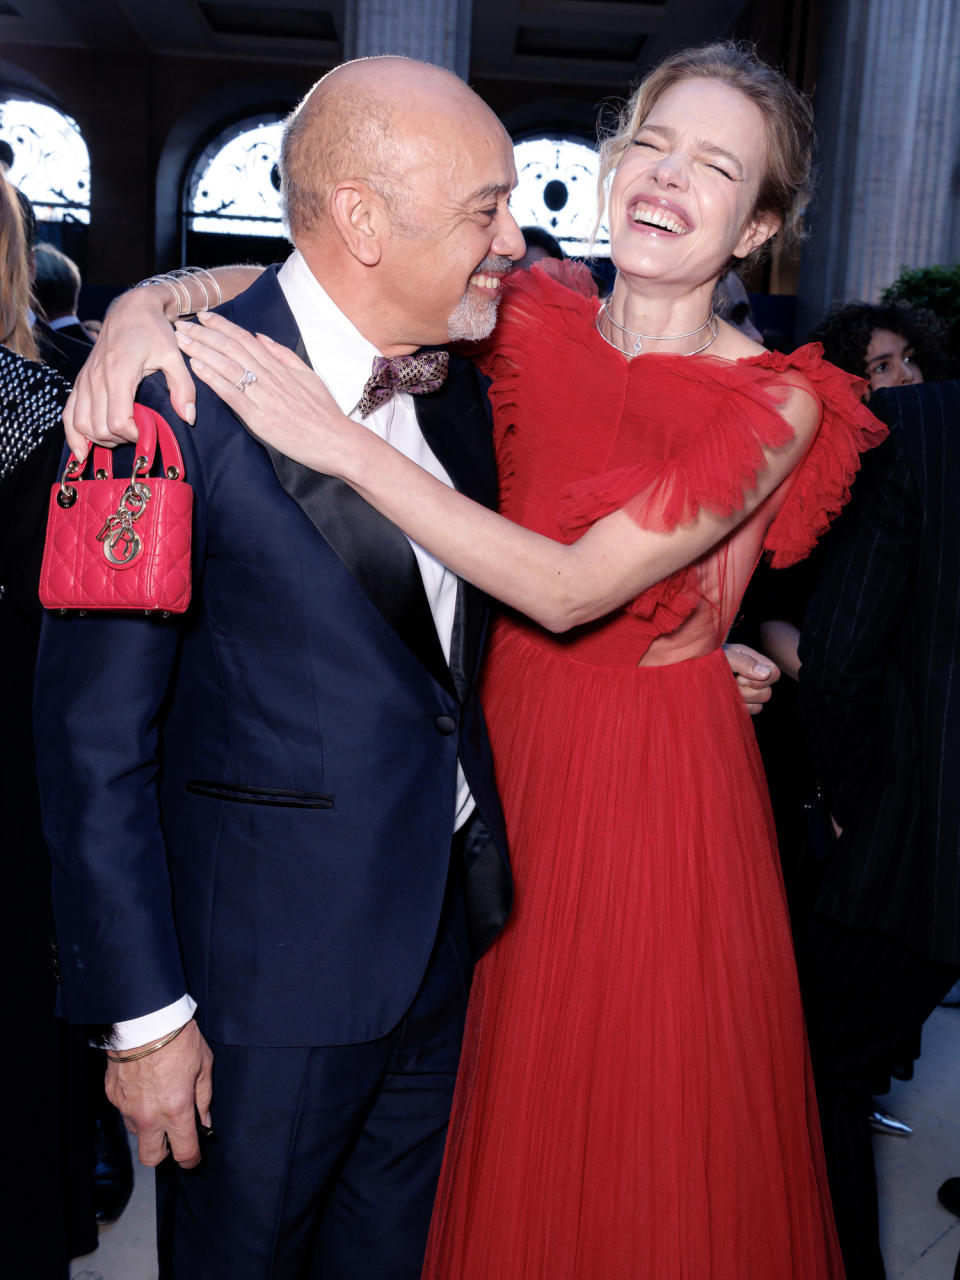 Christian Louboutin and Natalia Vodianova at the Paris for Good charity fundraiser held at the Place Vendôme on May 16, 2024 in Paris, France.